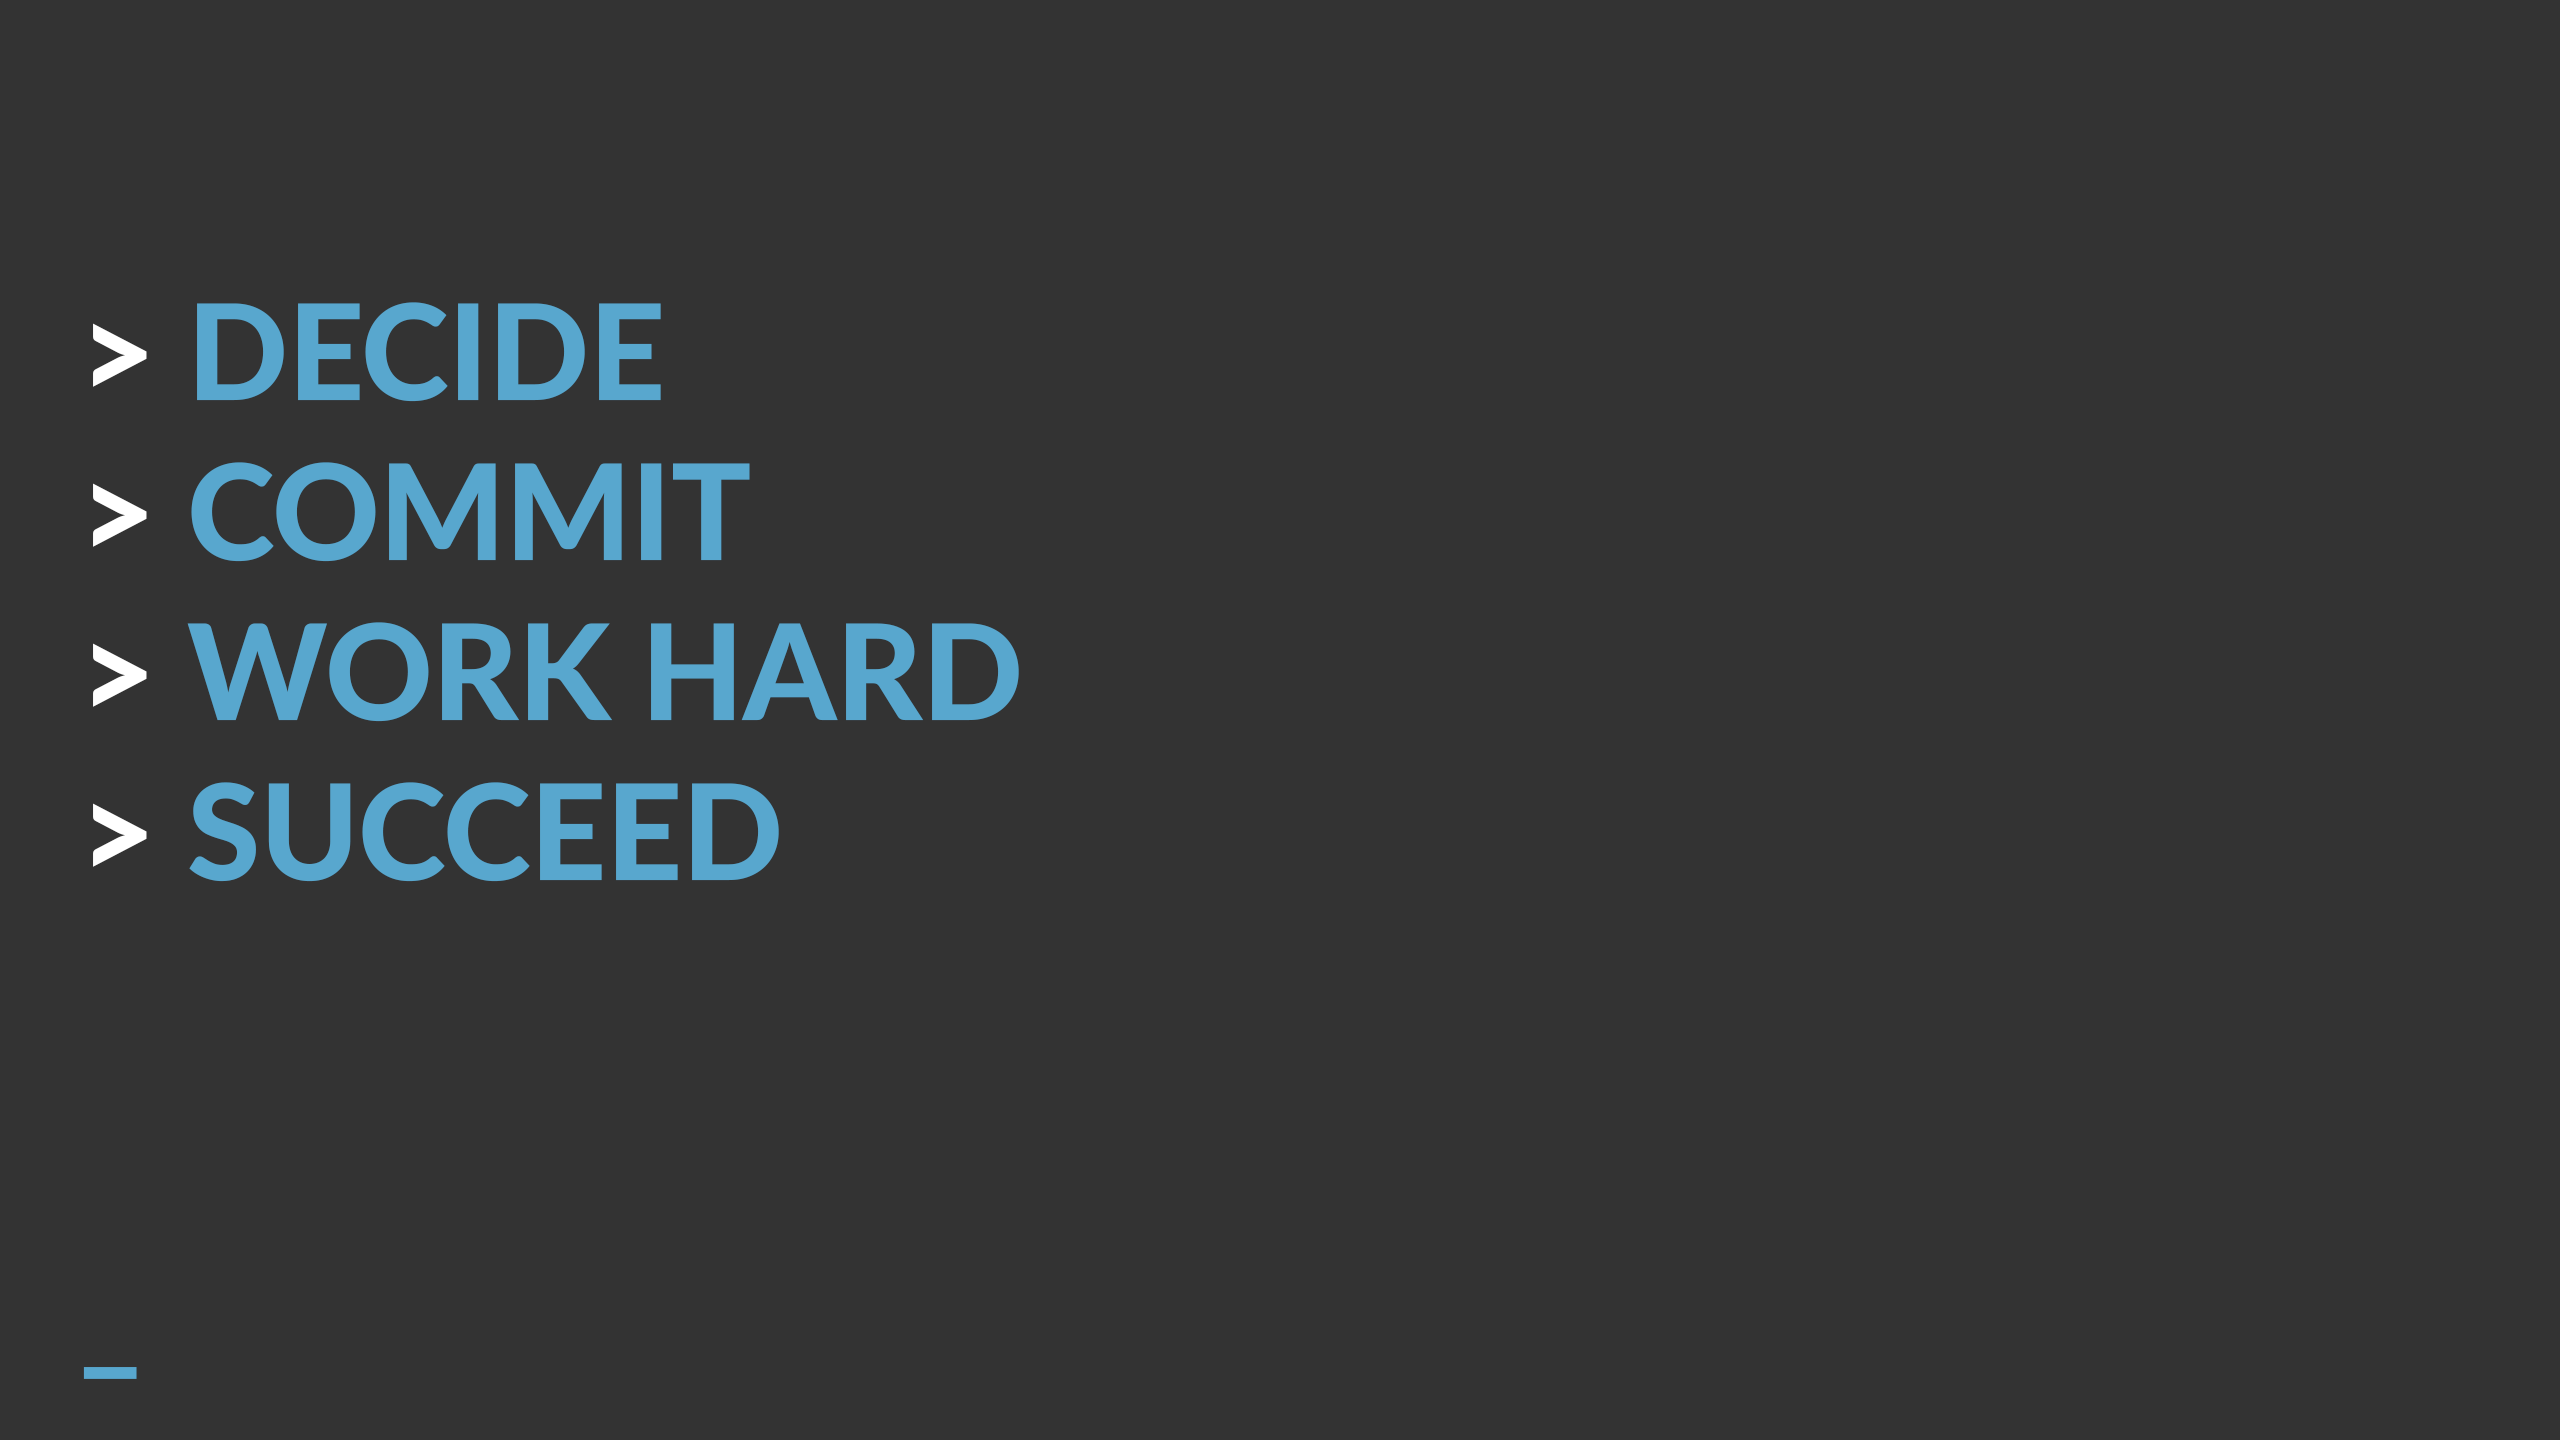 DECIDE COMMIT WORK HARD SUCCEED - New wallpaper I made